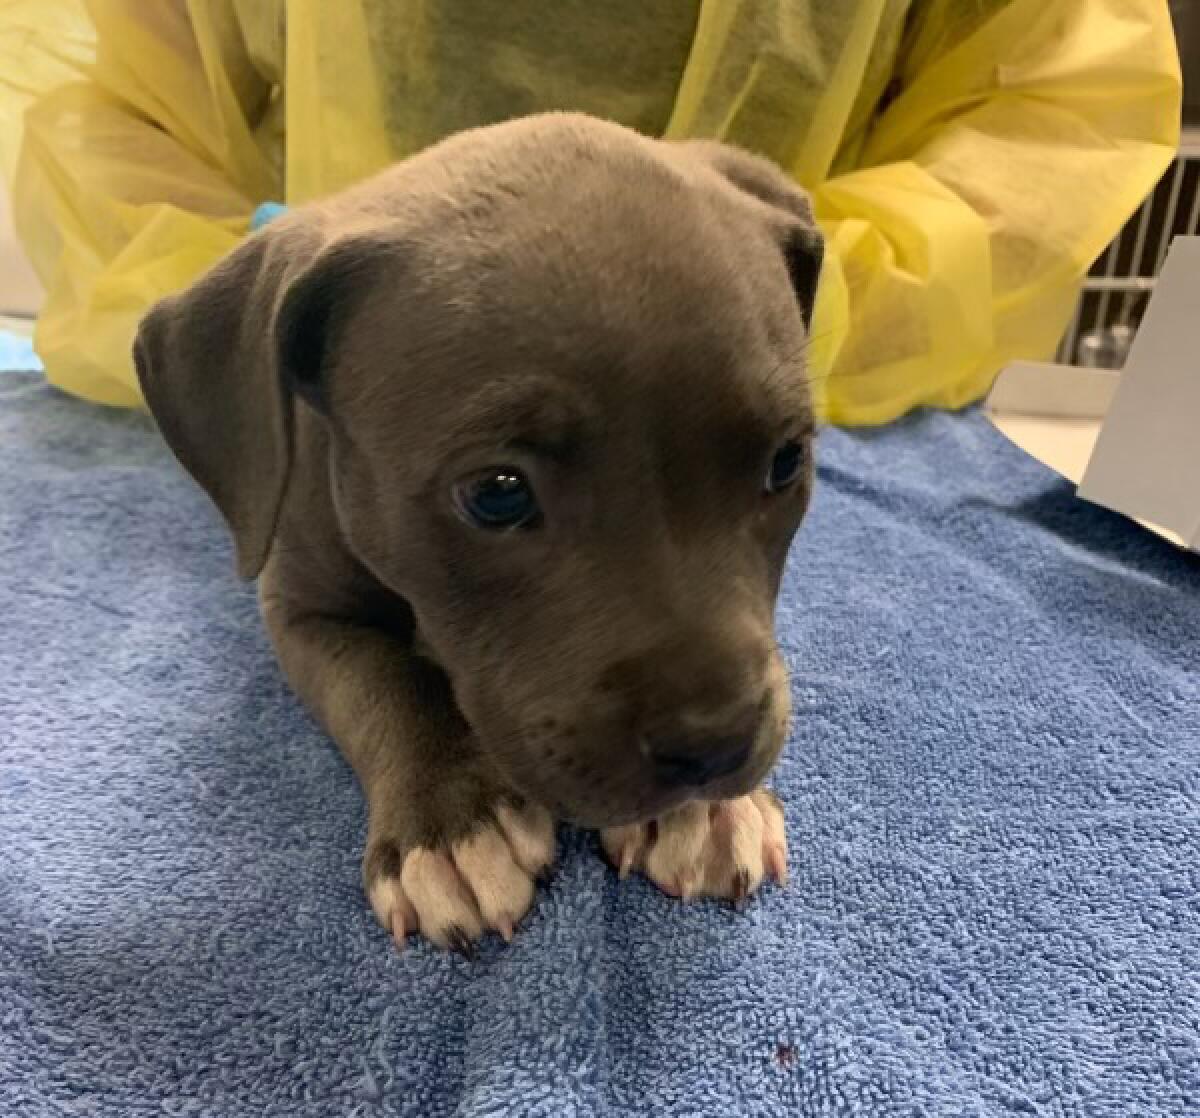 Irvine police administered a dose of the overdose-reversing drug naloxone to a pit bull puppy.